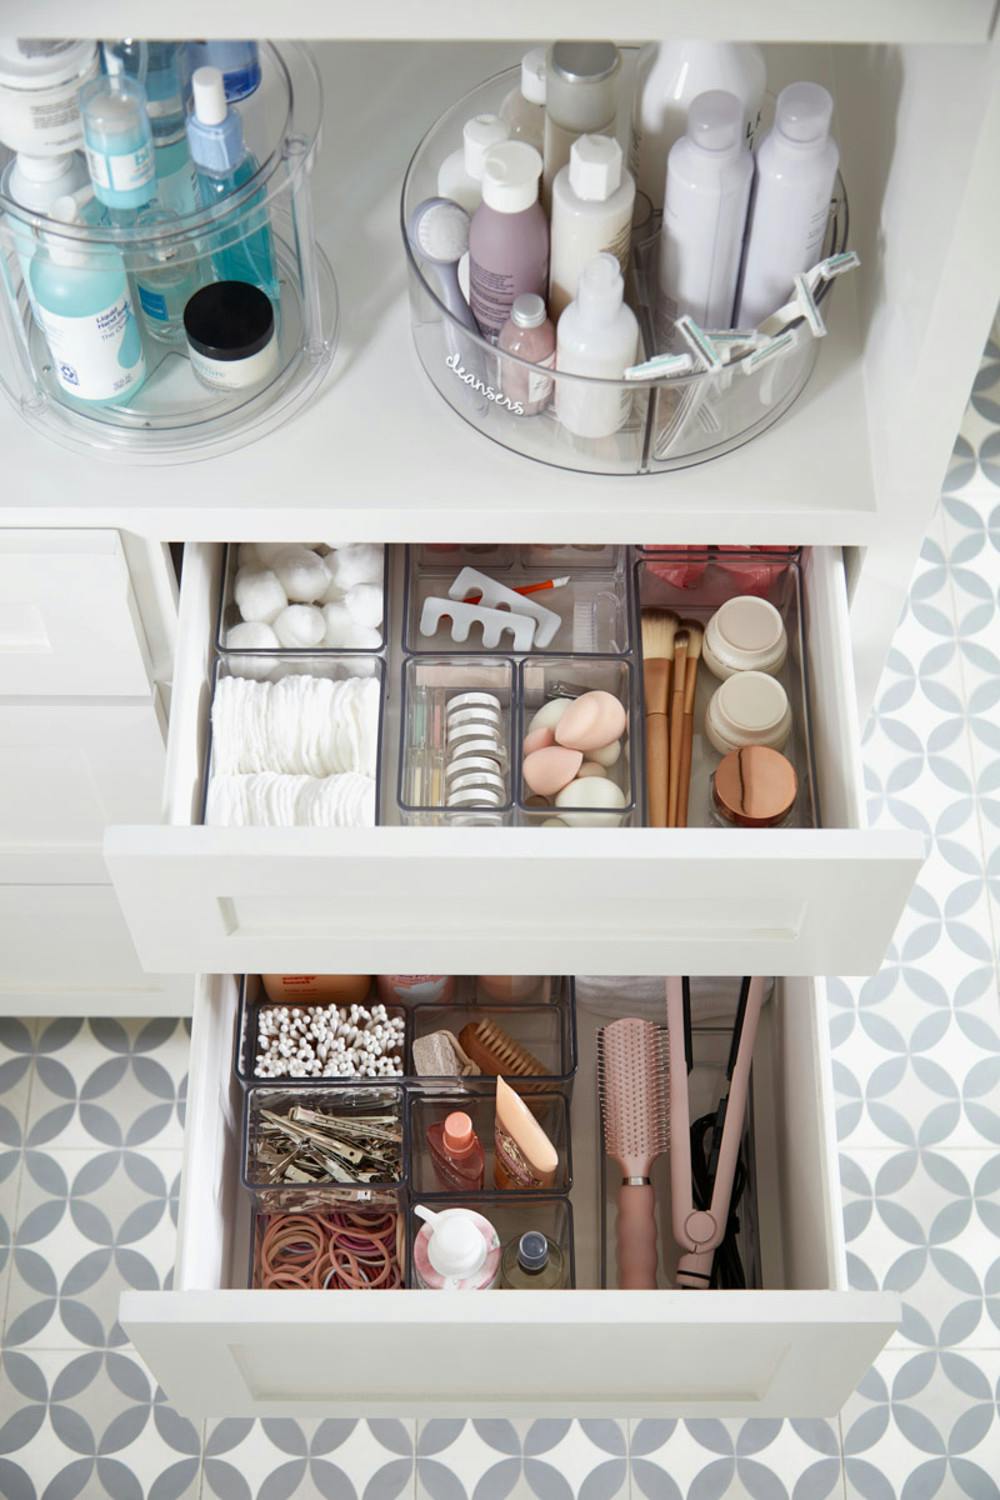 https://images.prismic.io/containerstoriesproduction/882f94f859972fc36c94d596089361715899f9a4_he_19_beauty-bathroom_drawers-1_2_rgb.jpg?auto=compress,format